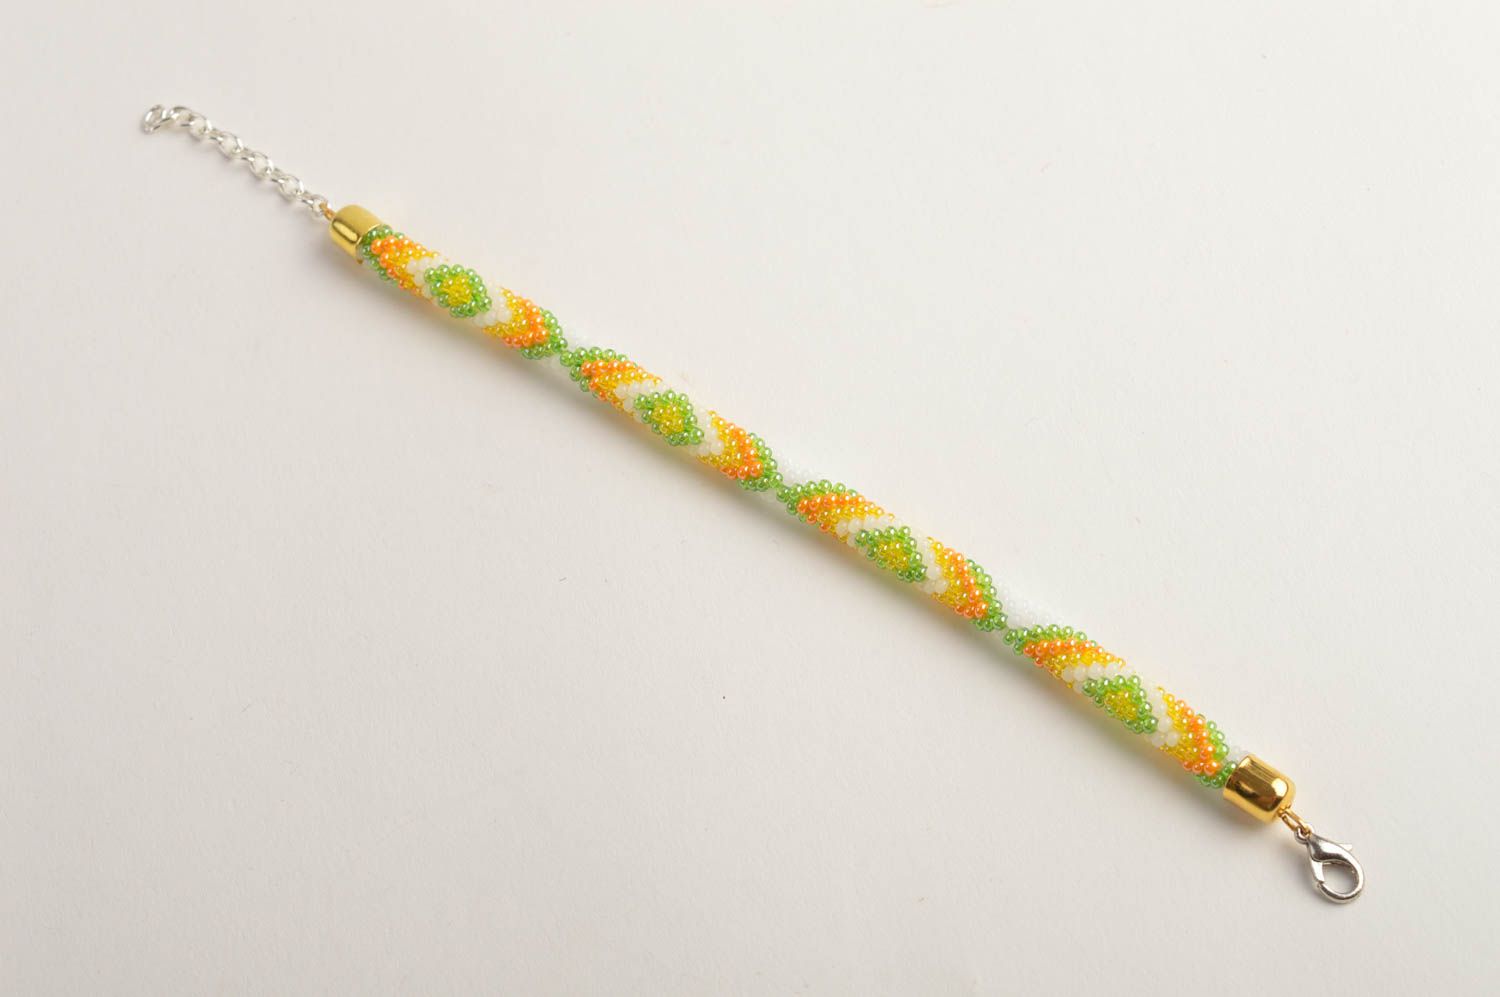 Beaded cord adjustable bracelet in light green, yellow and white color photo 2